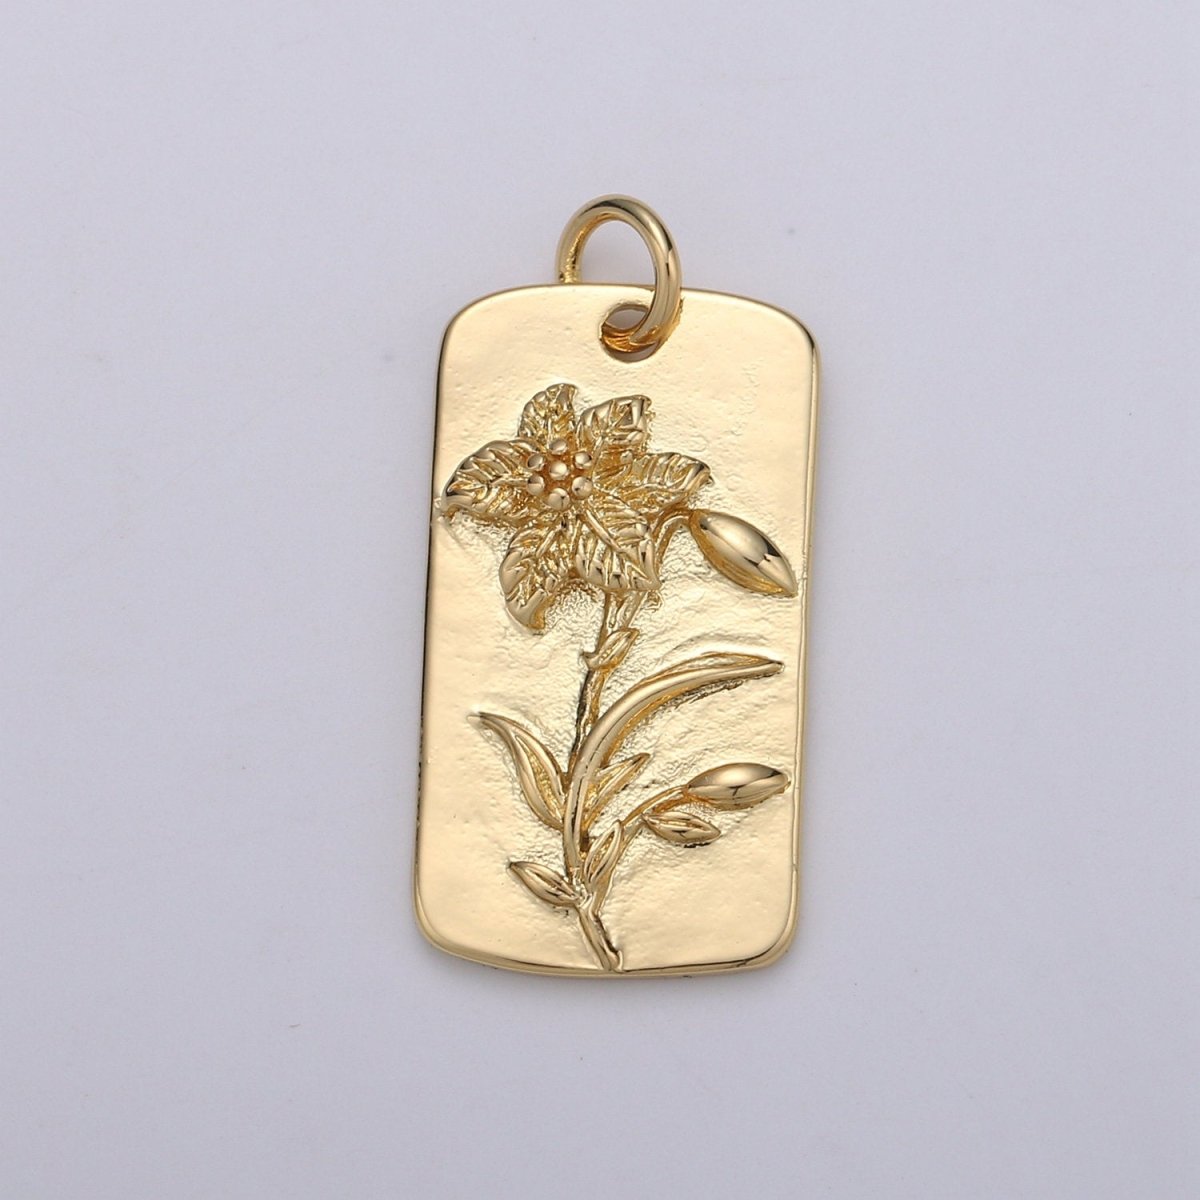 Narcissus Flower Charms, Gold Narcissus Pendant, Dainty Narcissus Charm, Small Wild Flower Charm for Necklace Floral Flower Jewelry D-754 - DLUXCA